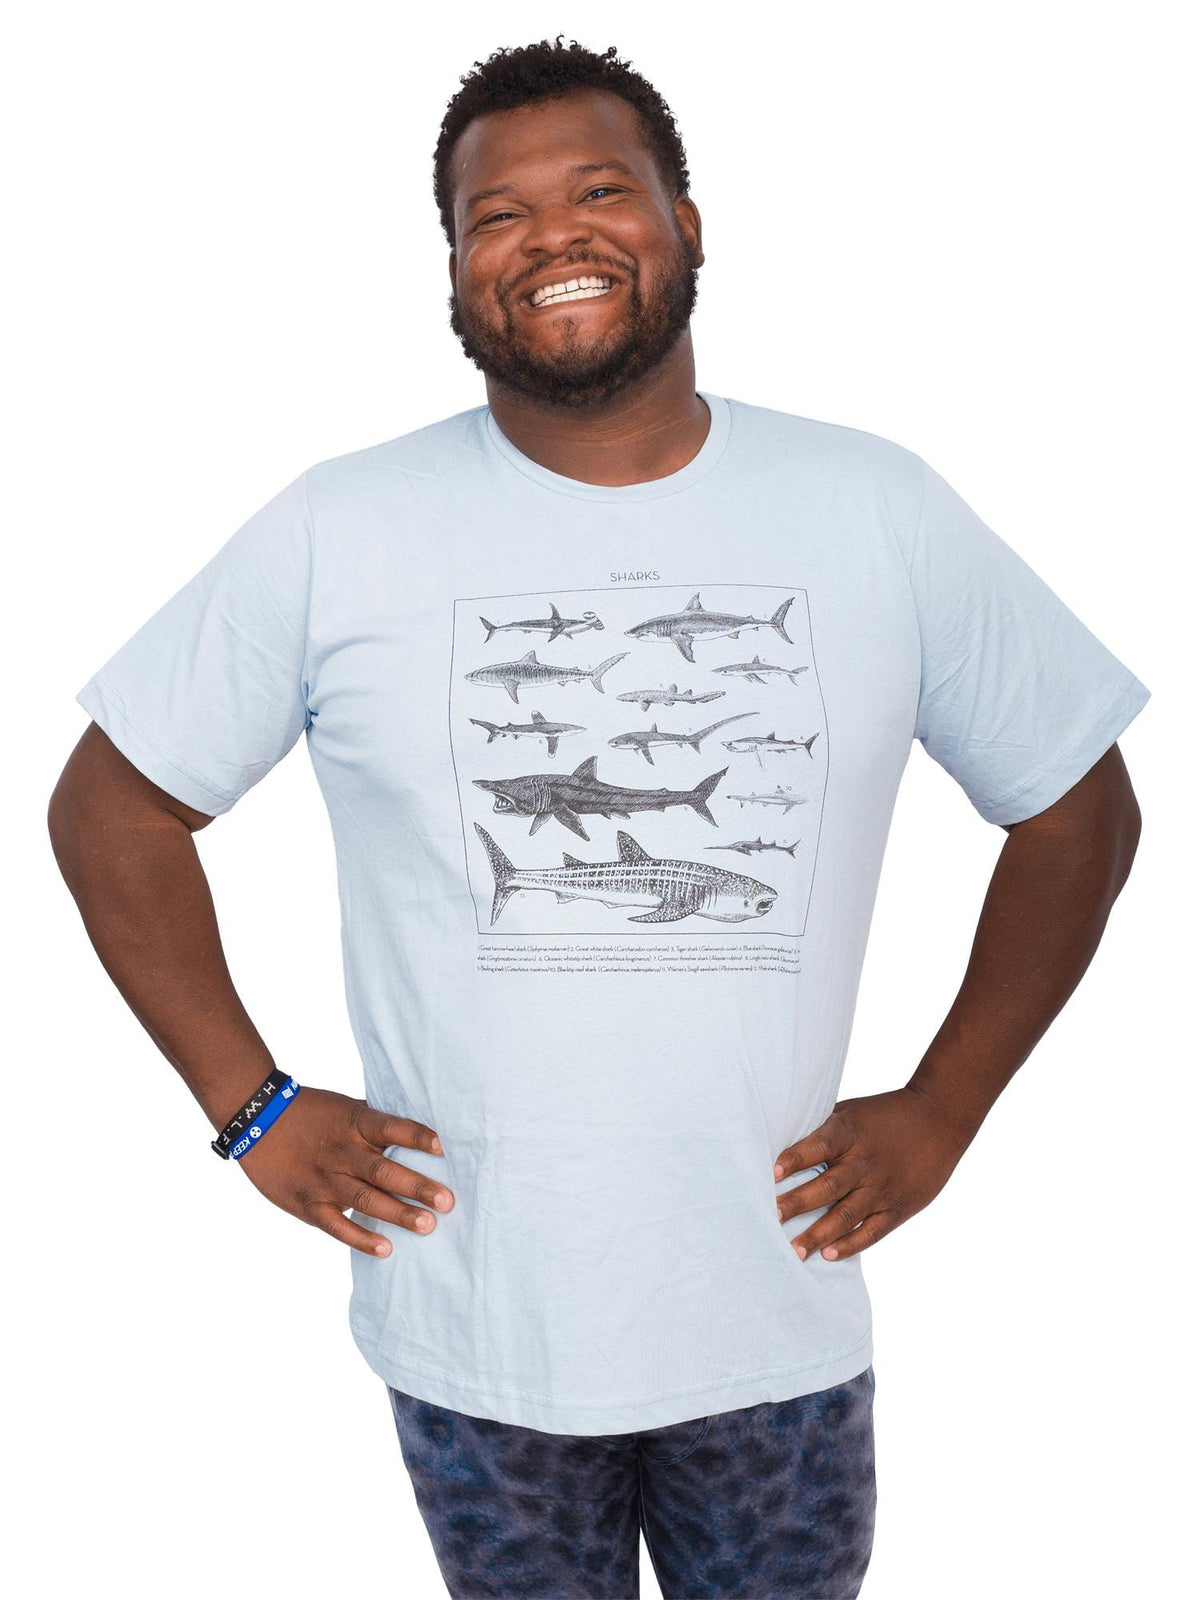 Model: Alex is a fish and wildlife biologist, and science communicator. He is 5’8”, 240 lbs and is wearing size XL tee.